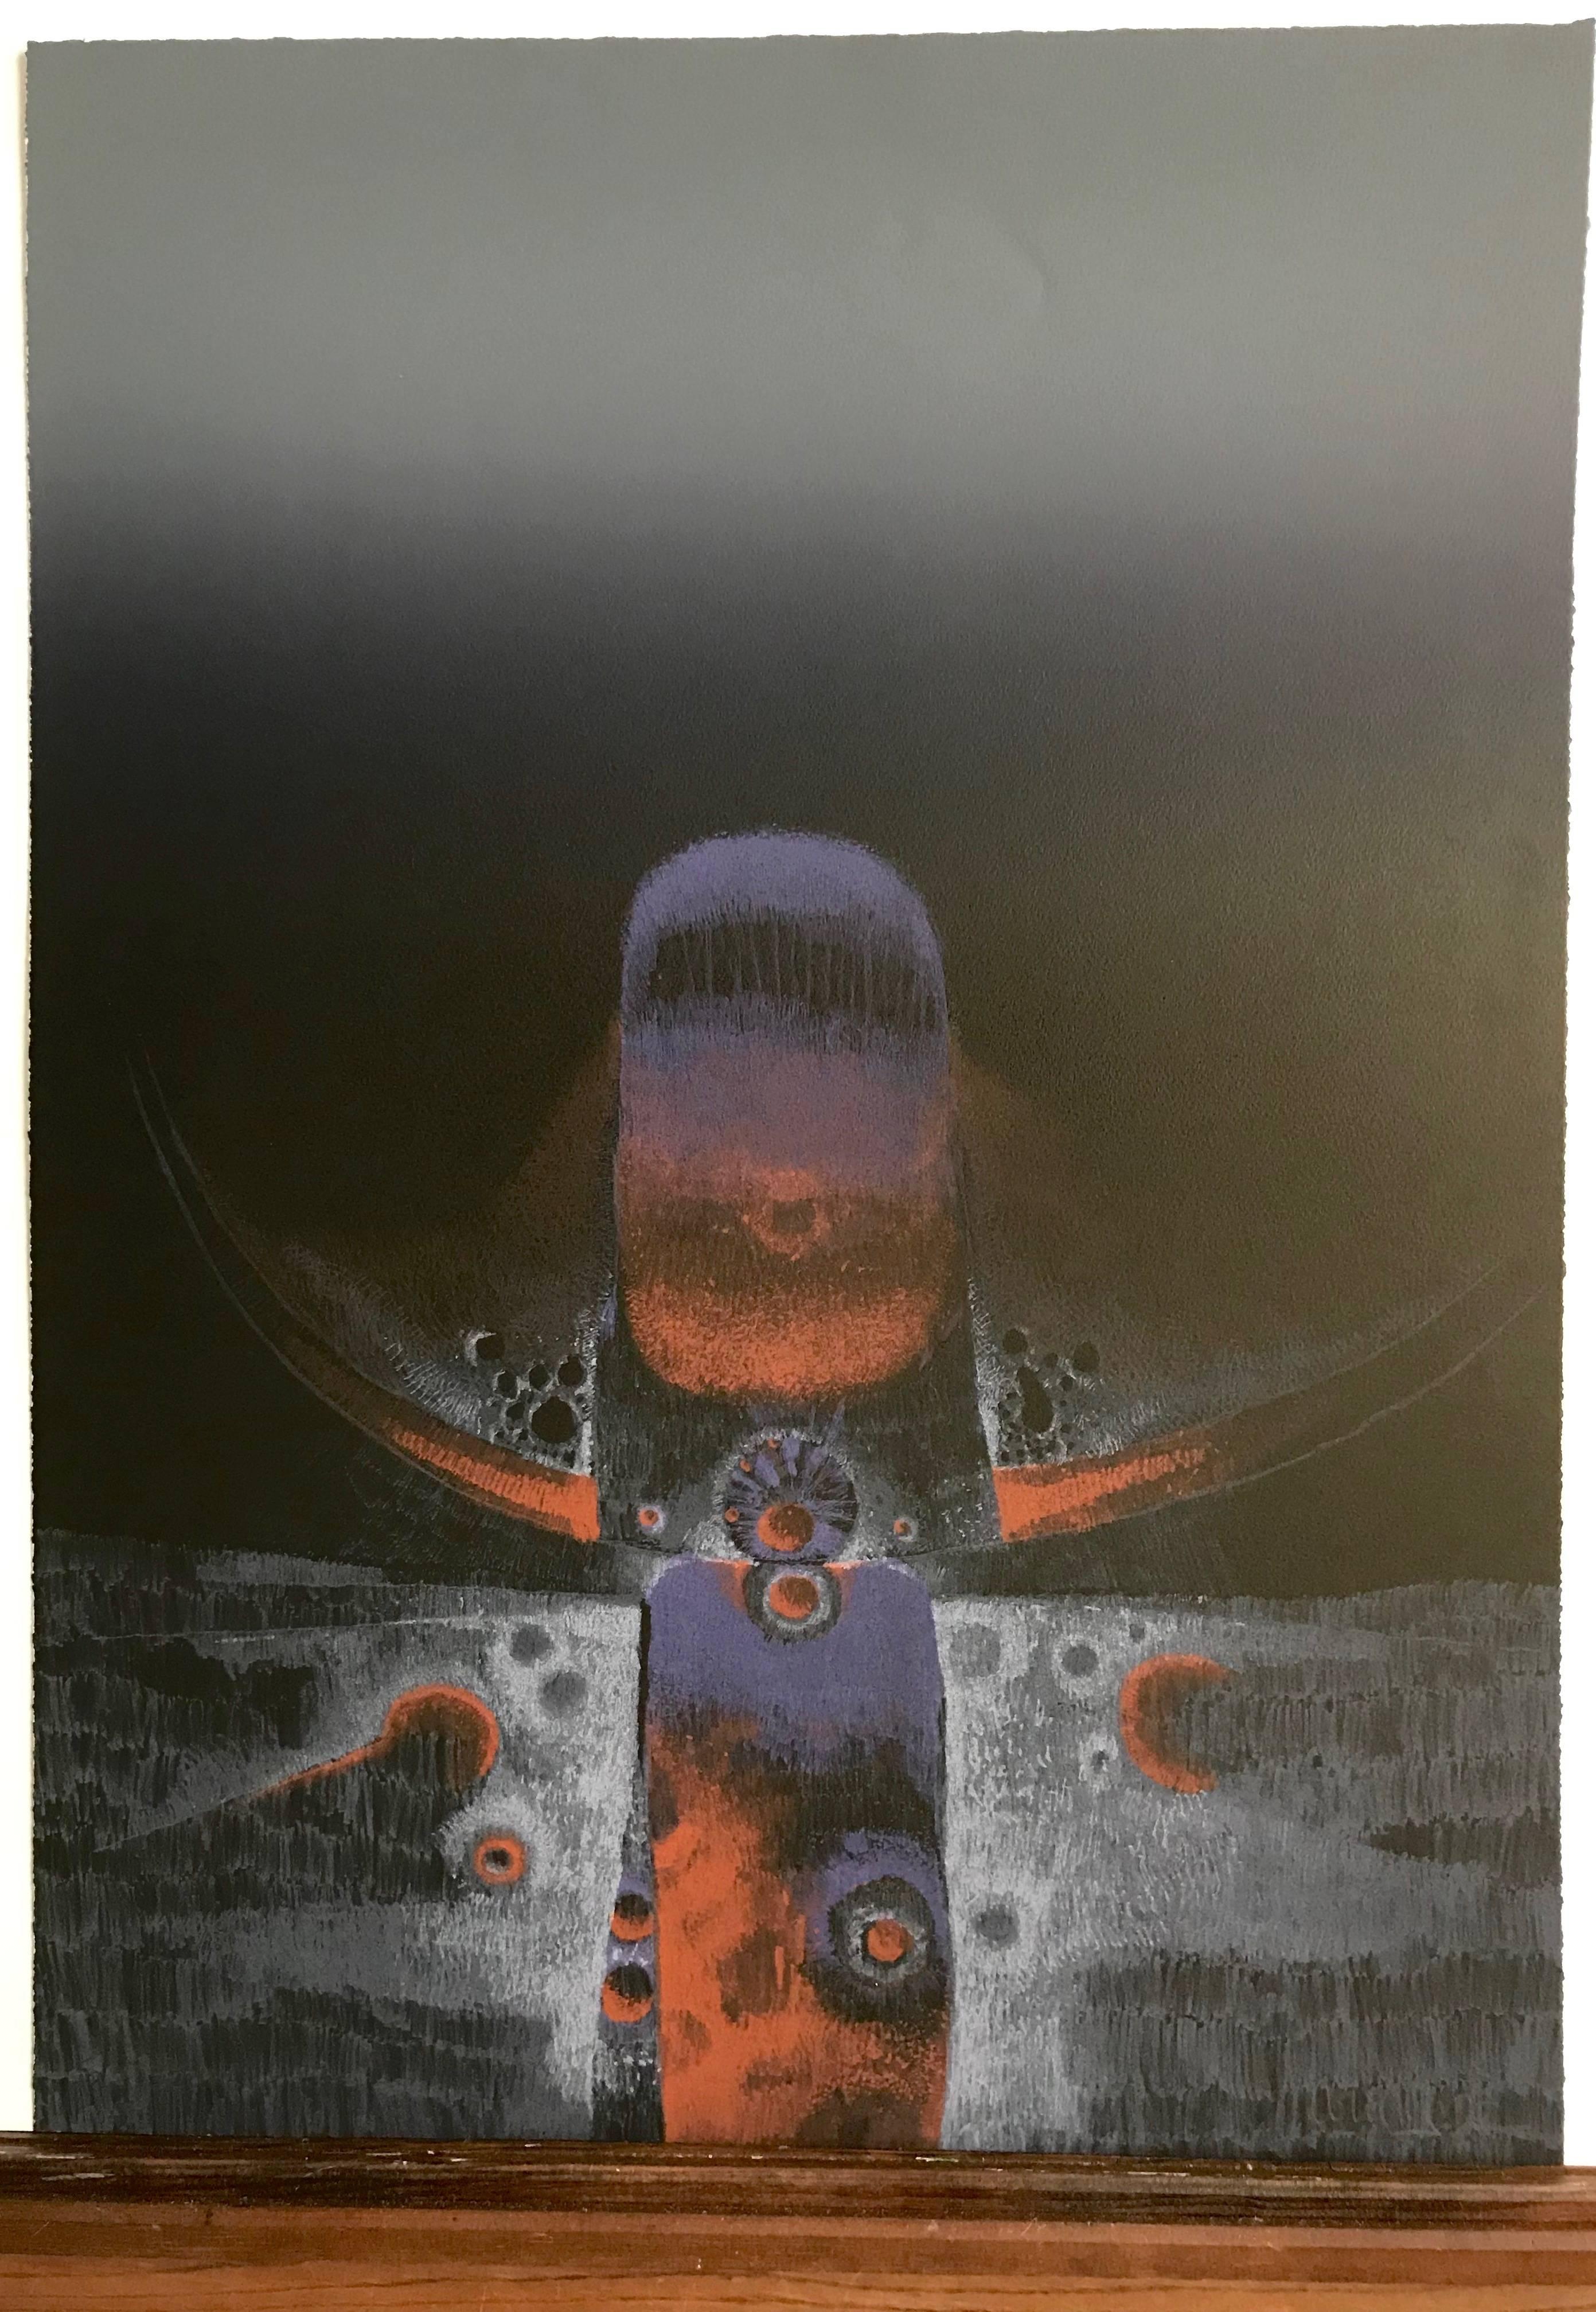 SPIRIT TOTEM Signed Lithograph, Surreal Abstract, South Asian, Purple Red Black  - Print by Arun Bose